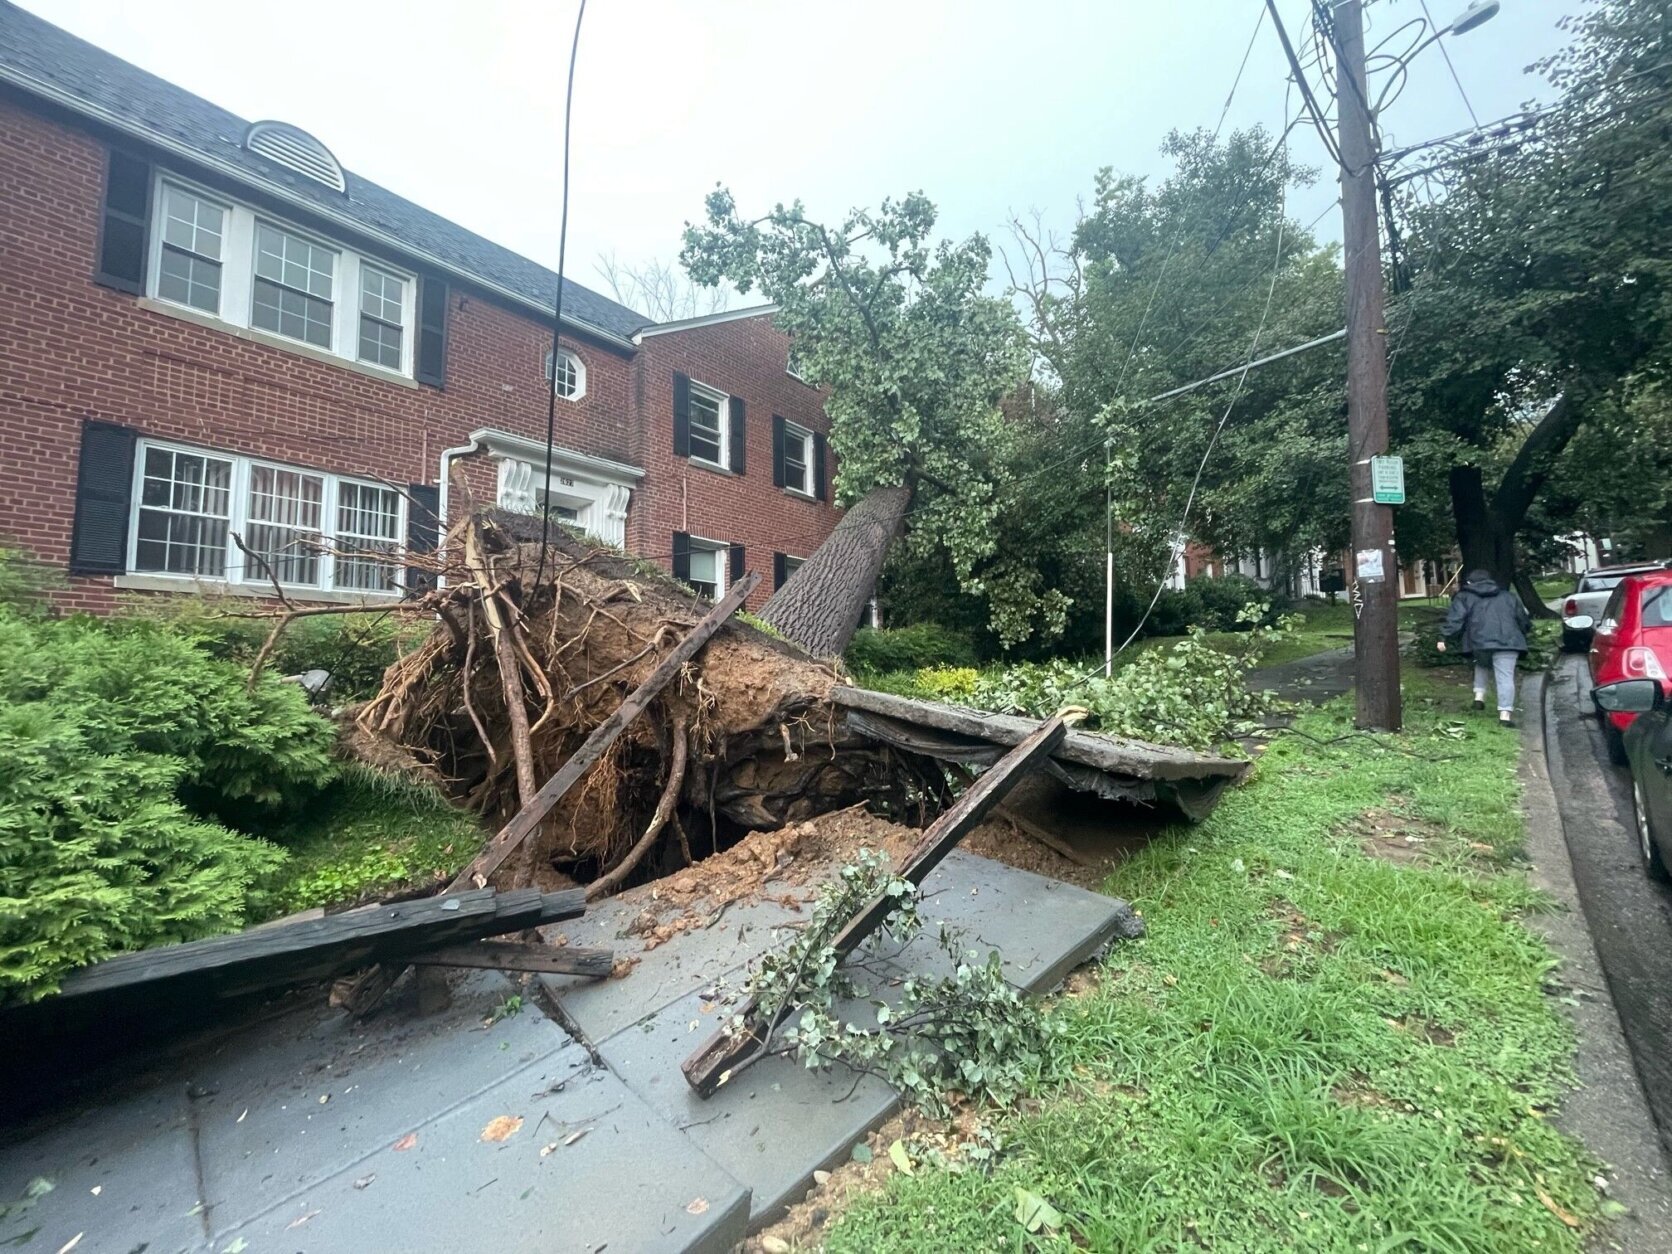 A tree torn down during the storm in Glover Park (Courtesy Nicholas Nguyen)